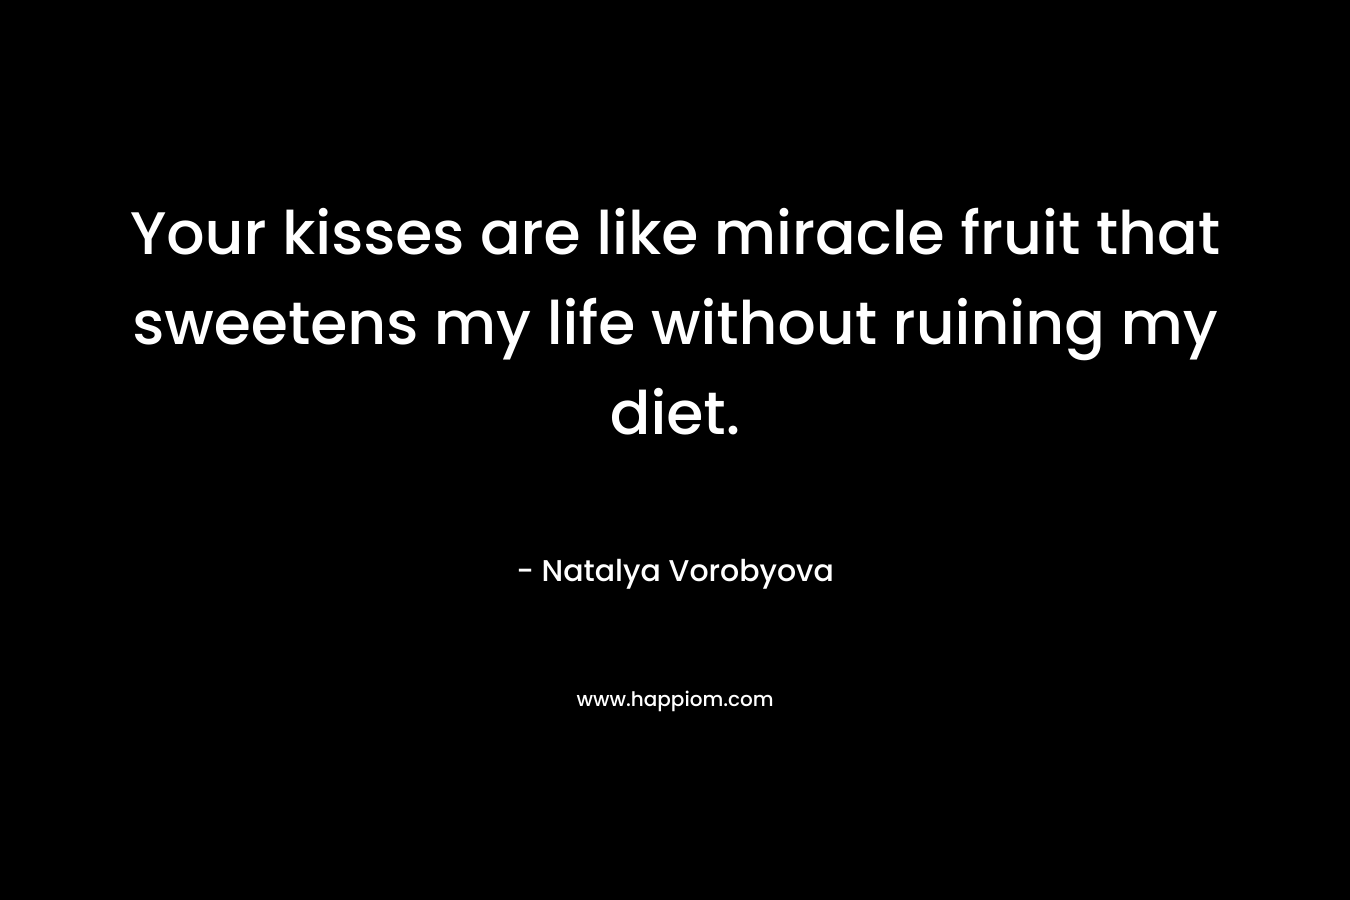 Your kisses are like miracle fruit that sweetens my life without ruining my diet. – Natalya Vorobyova